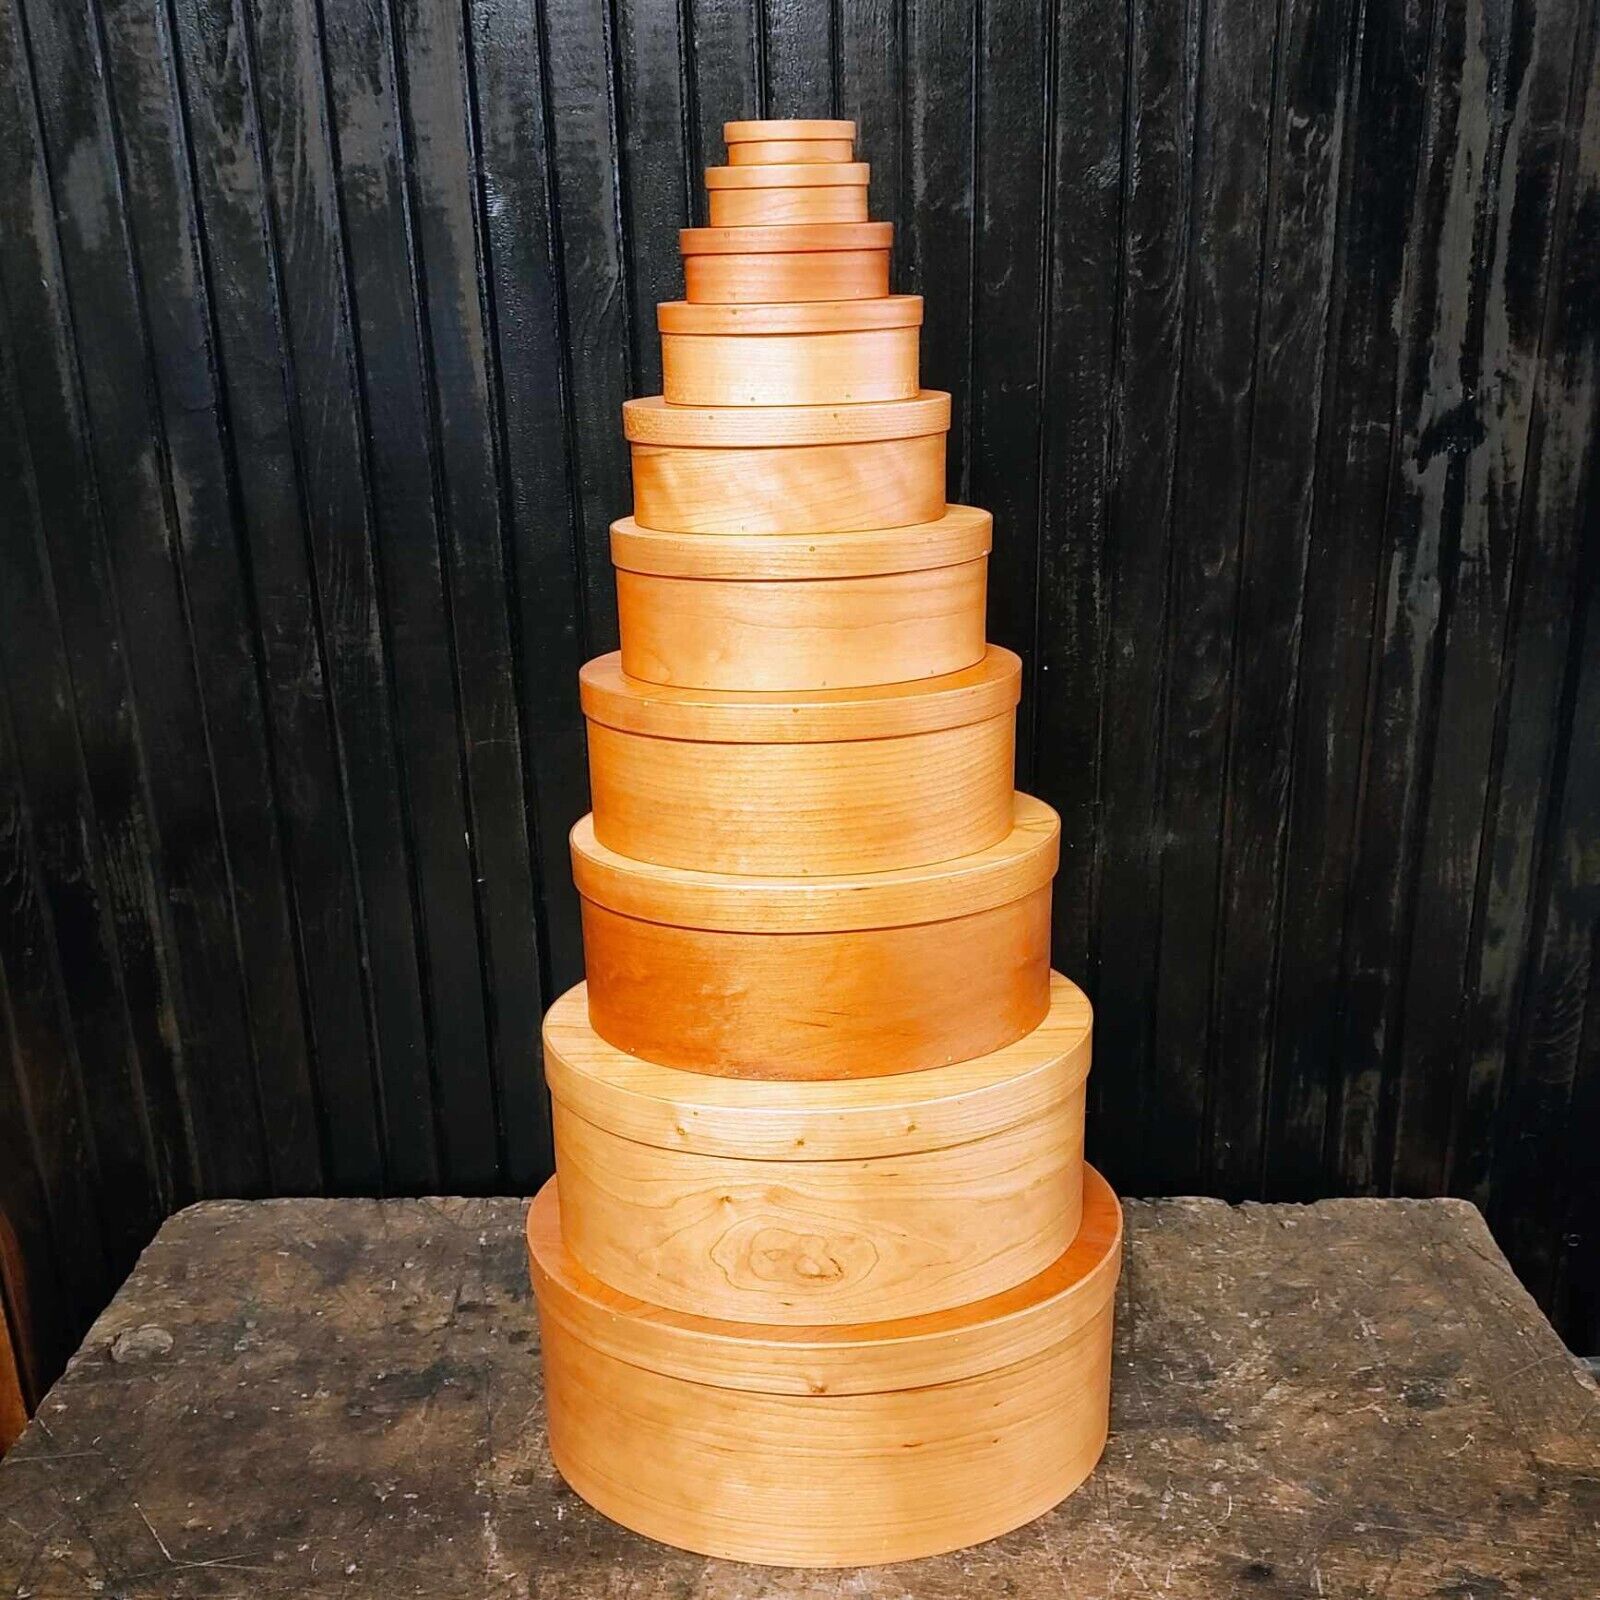 Vintage Oval Shaker Box Set Of 10 Cherry Wood And Signed By Steve Costain 2019